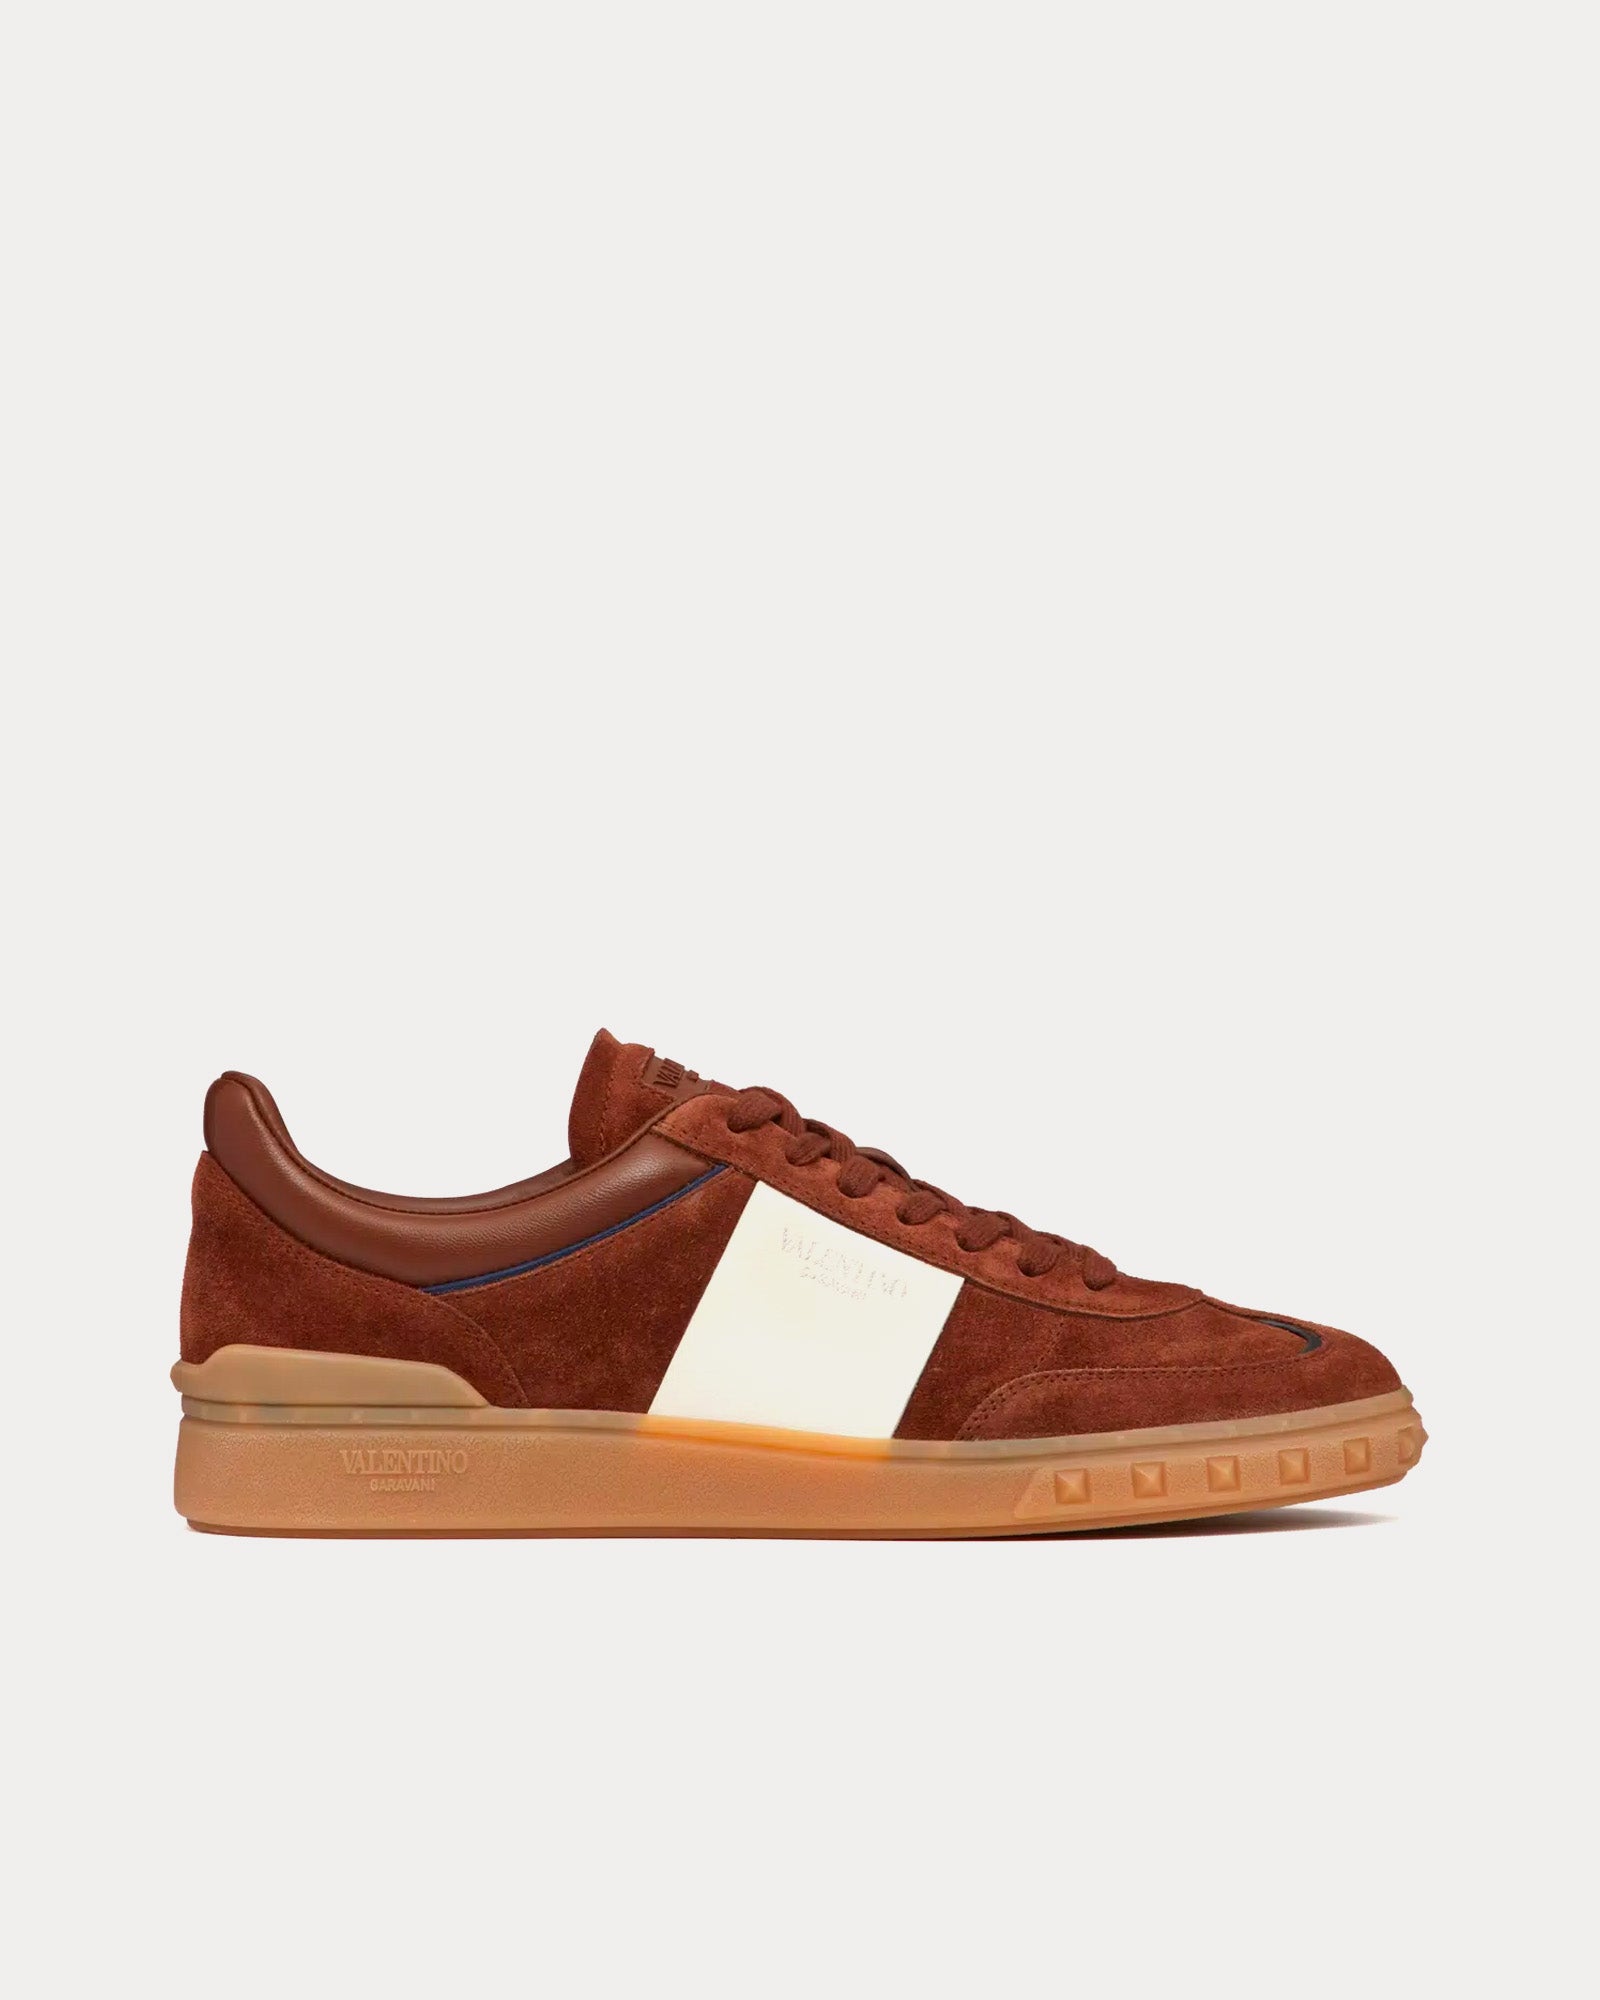 Valentino - Upvillage Leather Chocolate / Ivory Low Top Sneakers